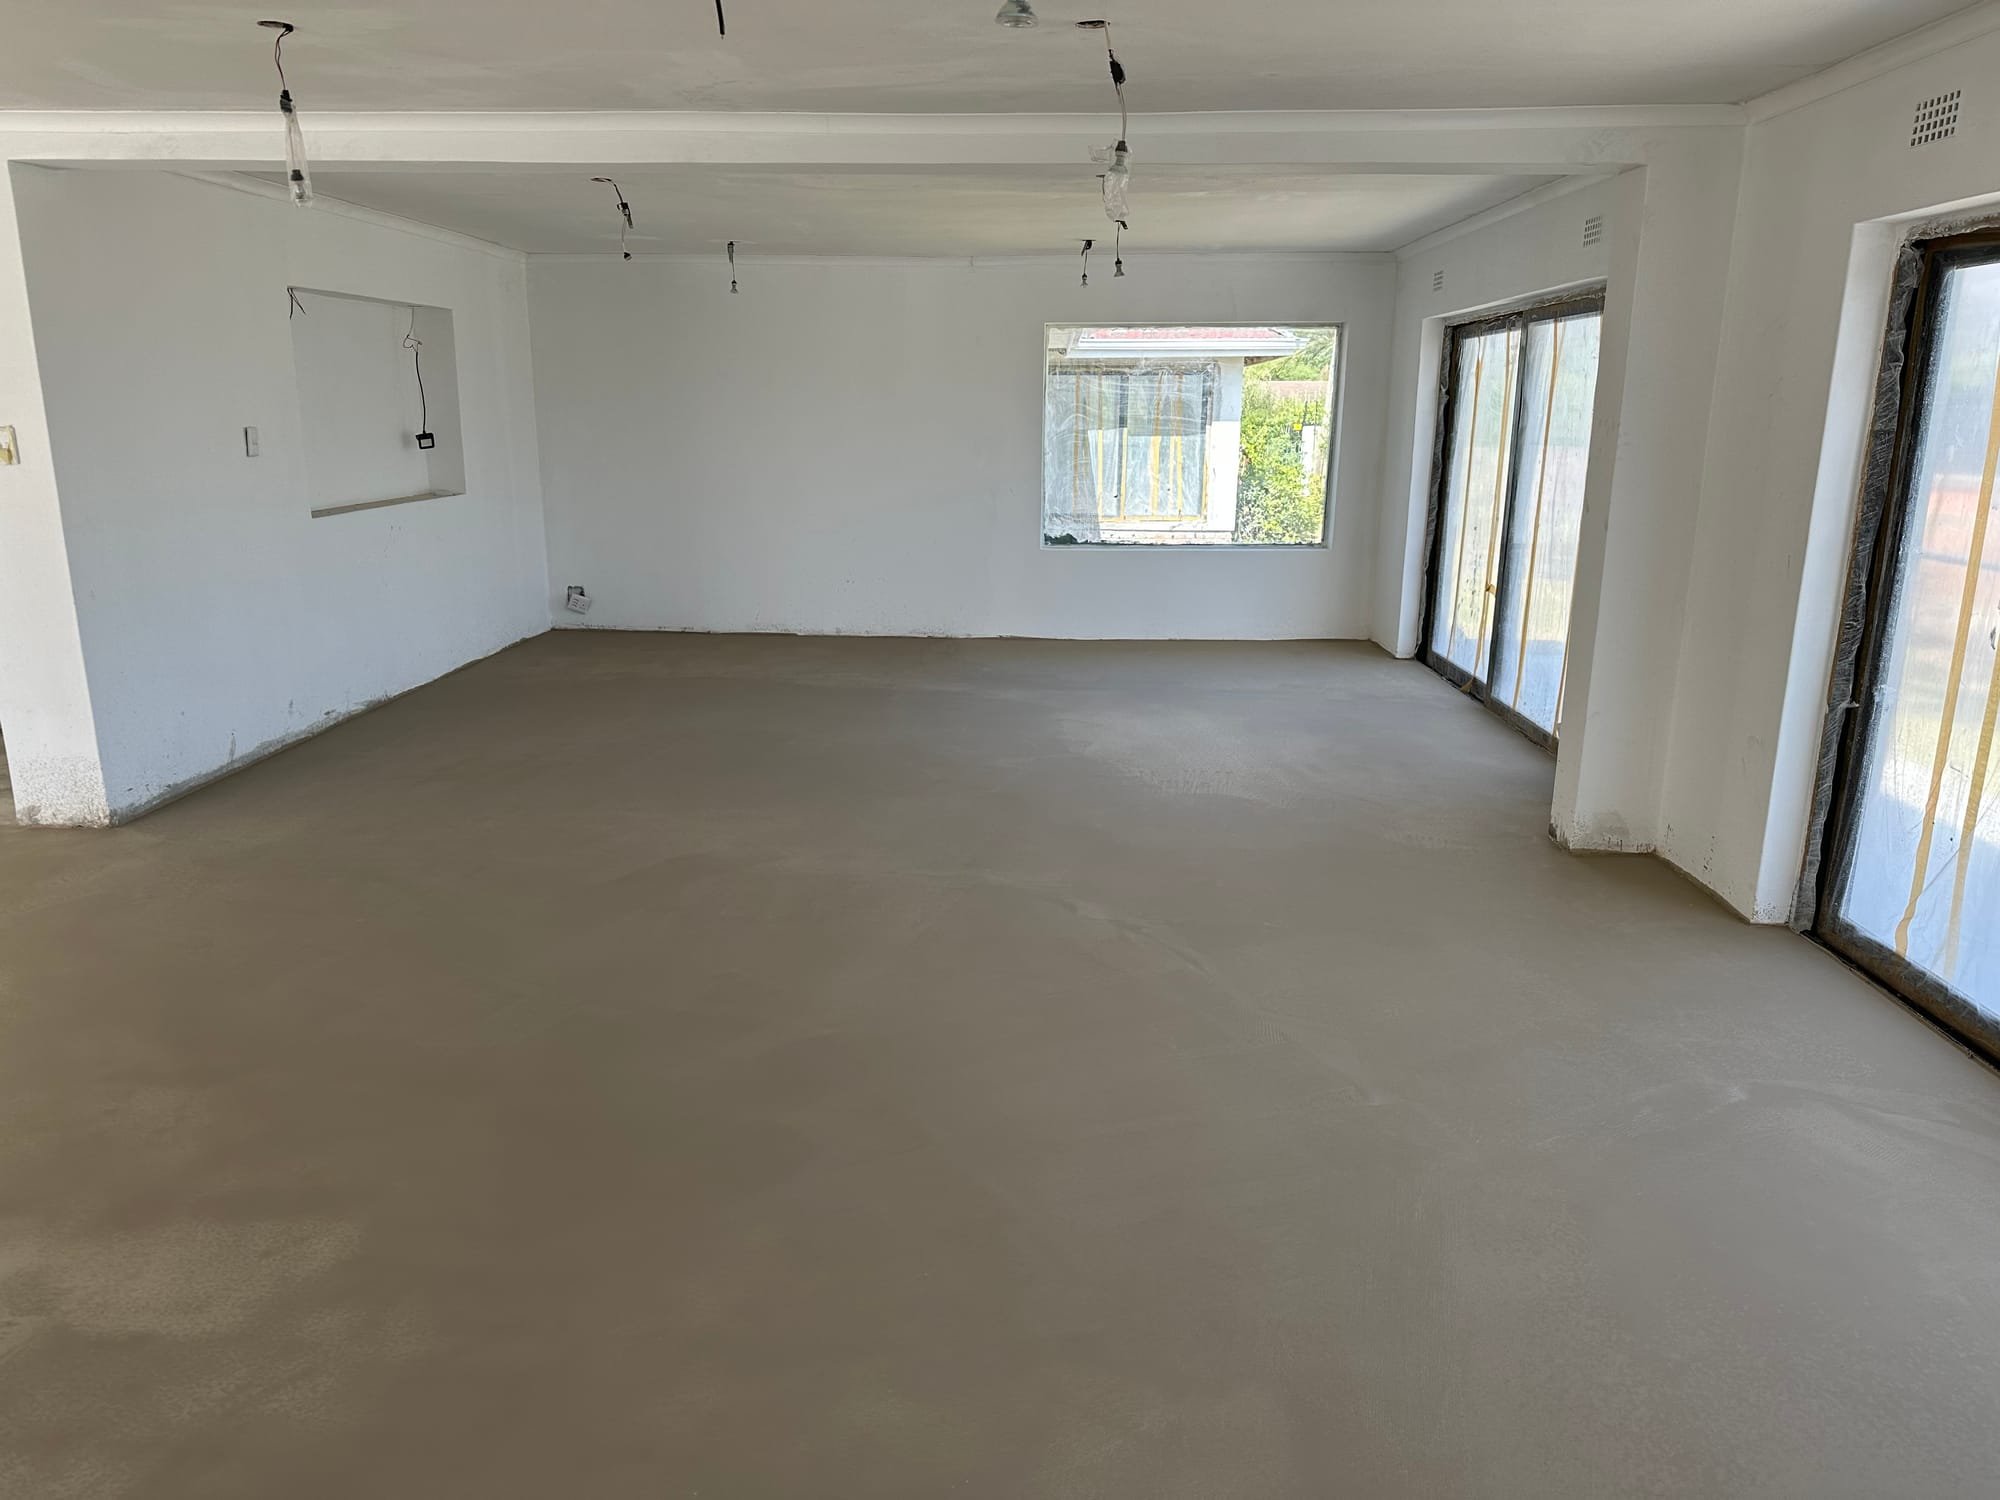 Somerset West - clients screed repaired & Self Levelled with Wakol Z680